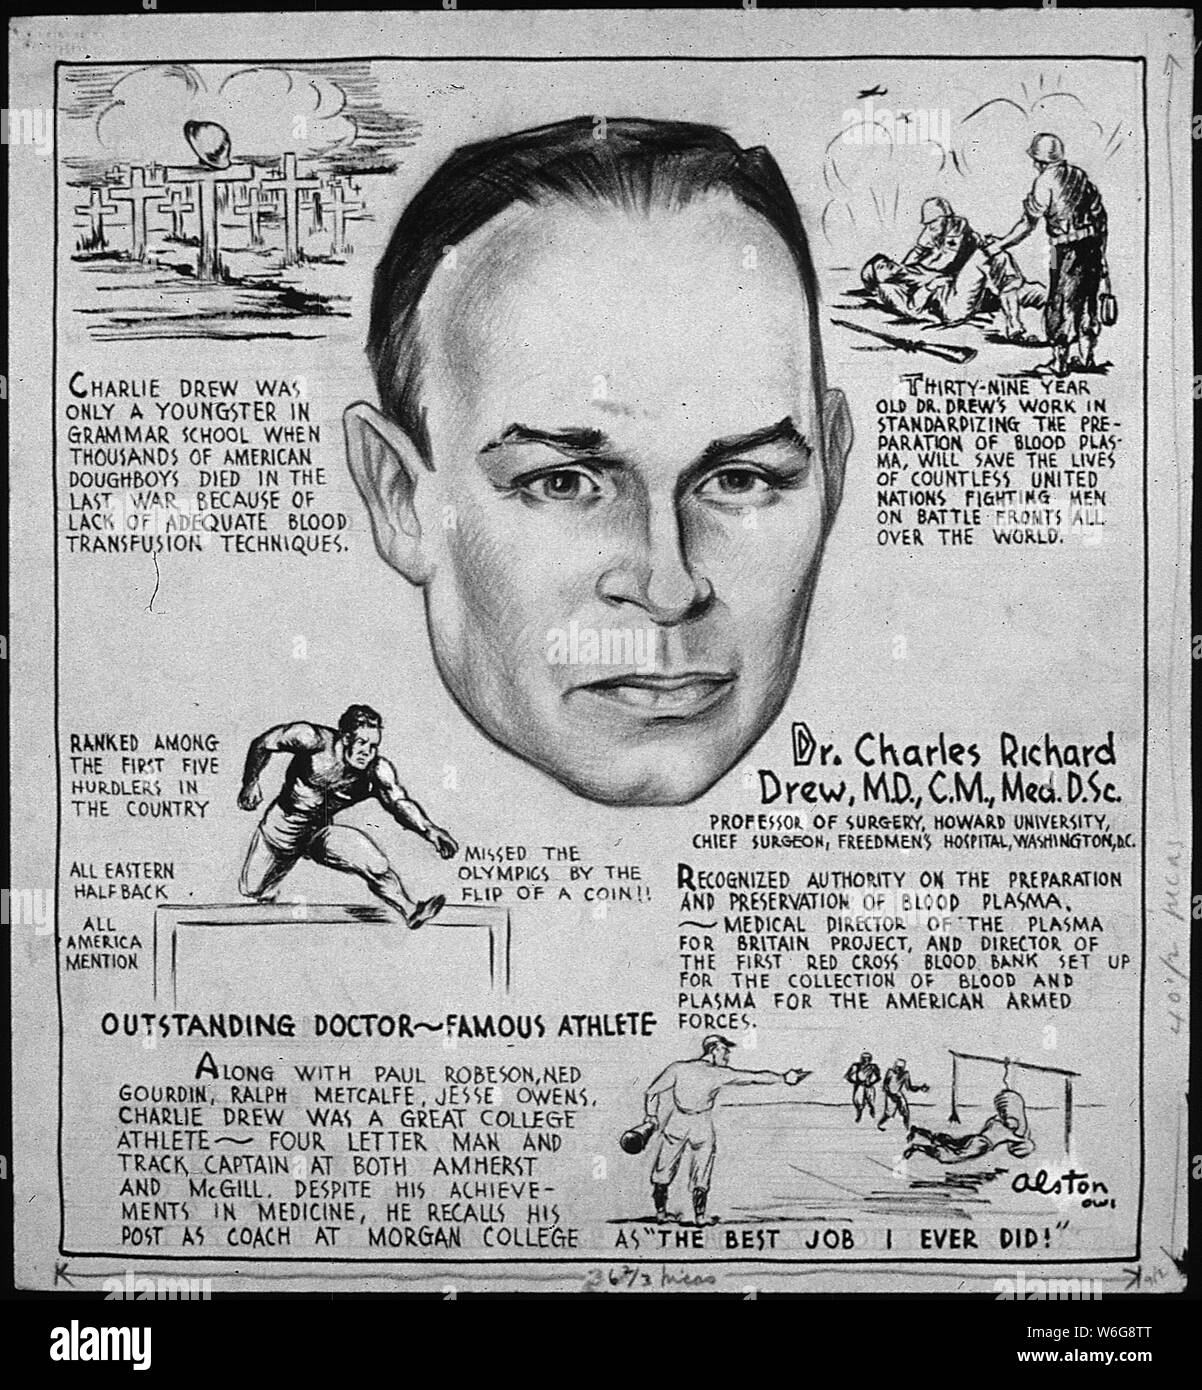 DR. CHARLES RICHARD DREW, M.D., C.M., MED. D.Sc. - PROFESSOR OF SURGERY, HOWARD UNIVERSTITY, CHIEF SURGEON, FREEDMESN'S HOSPITAL, WASHINGTON, D.C.; Scope and content:  Dr. Charles Drew - with biographical paragraphs. Stock Photo